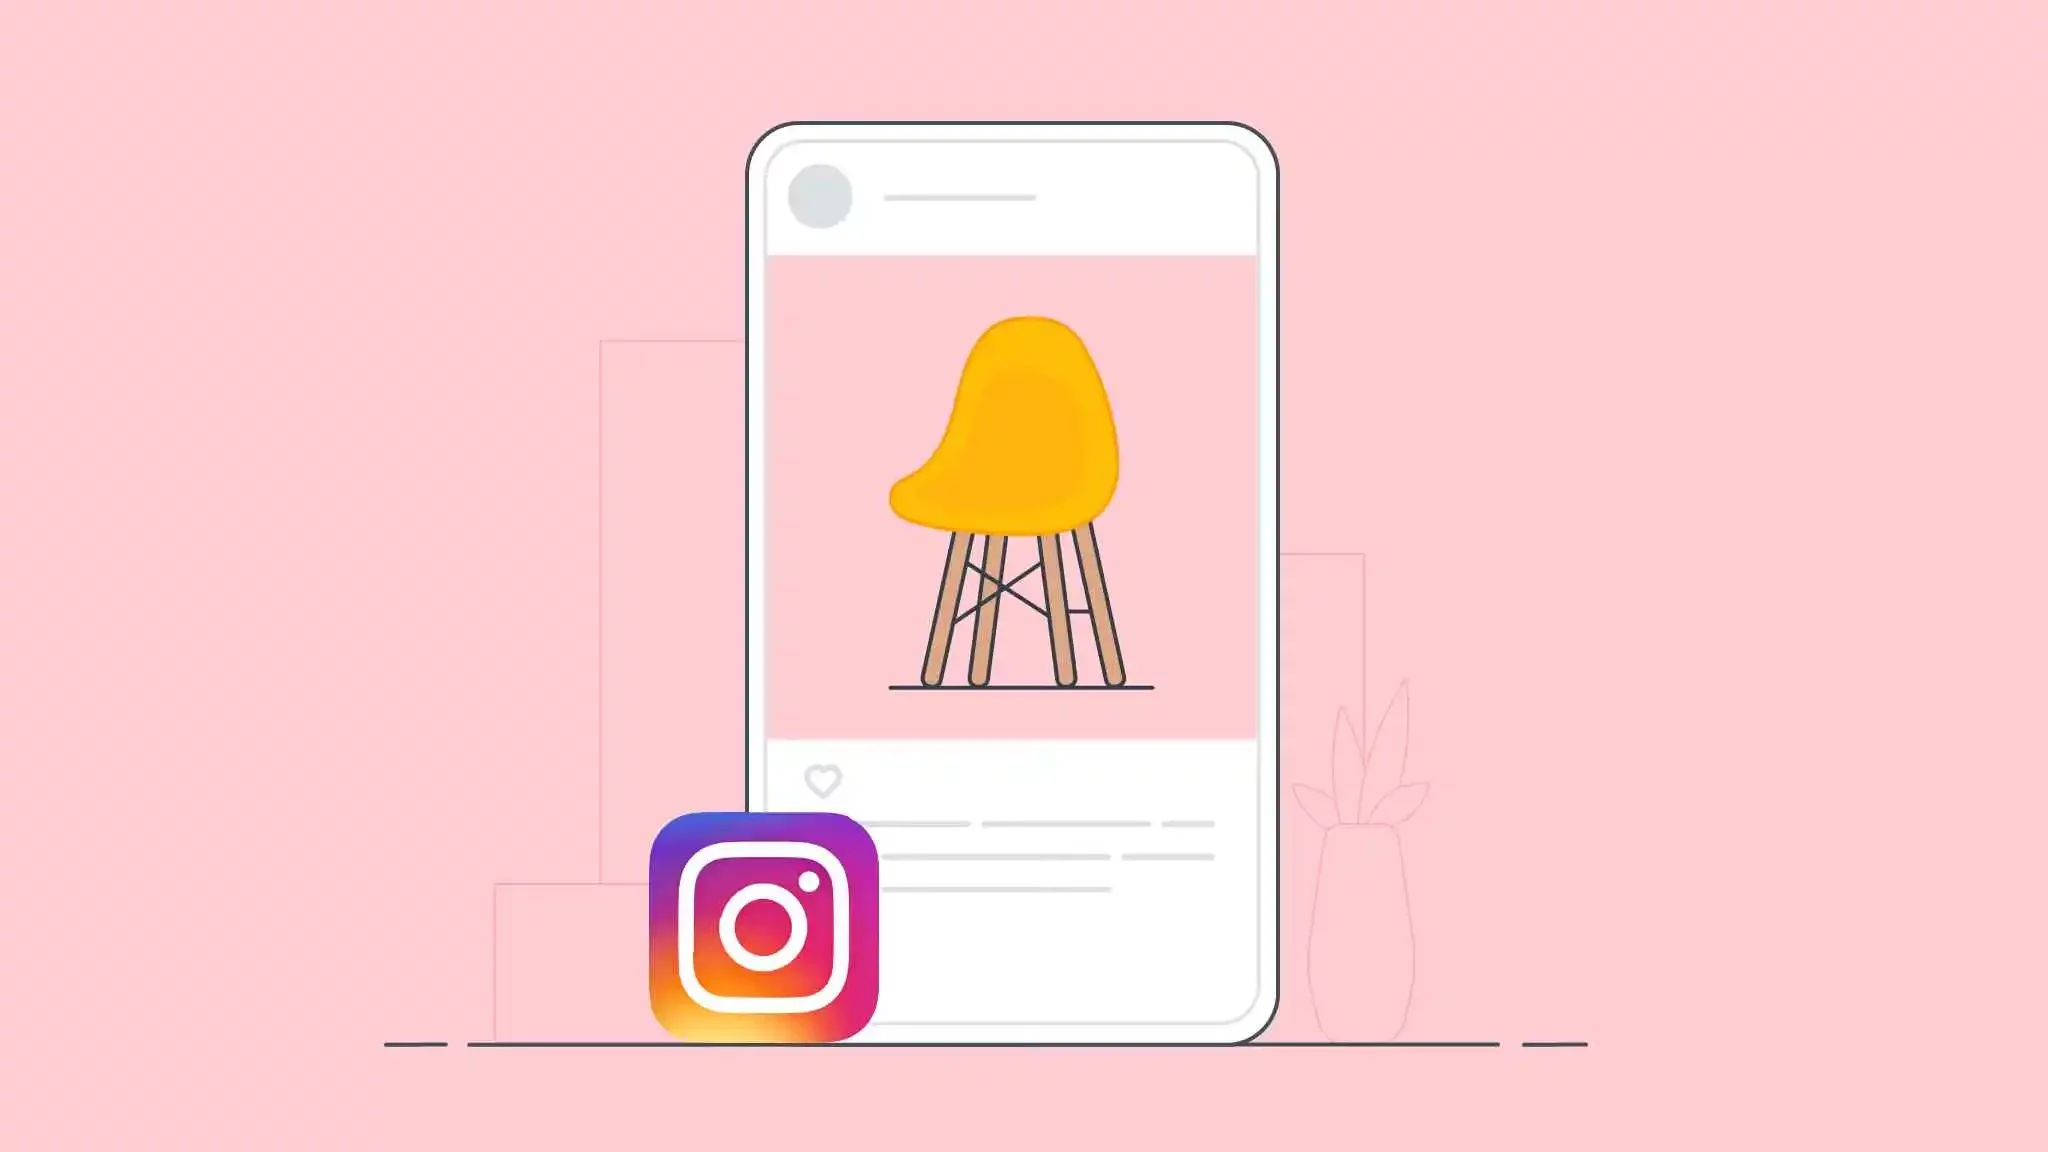 How To Copy Text From Instagram Post | 2 Sneaky Ways To Copy Captions!